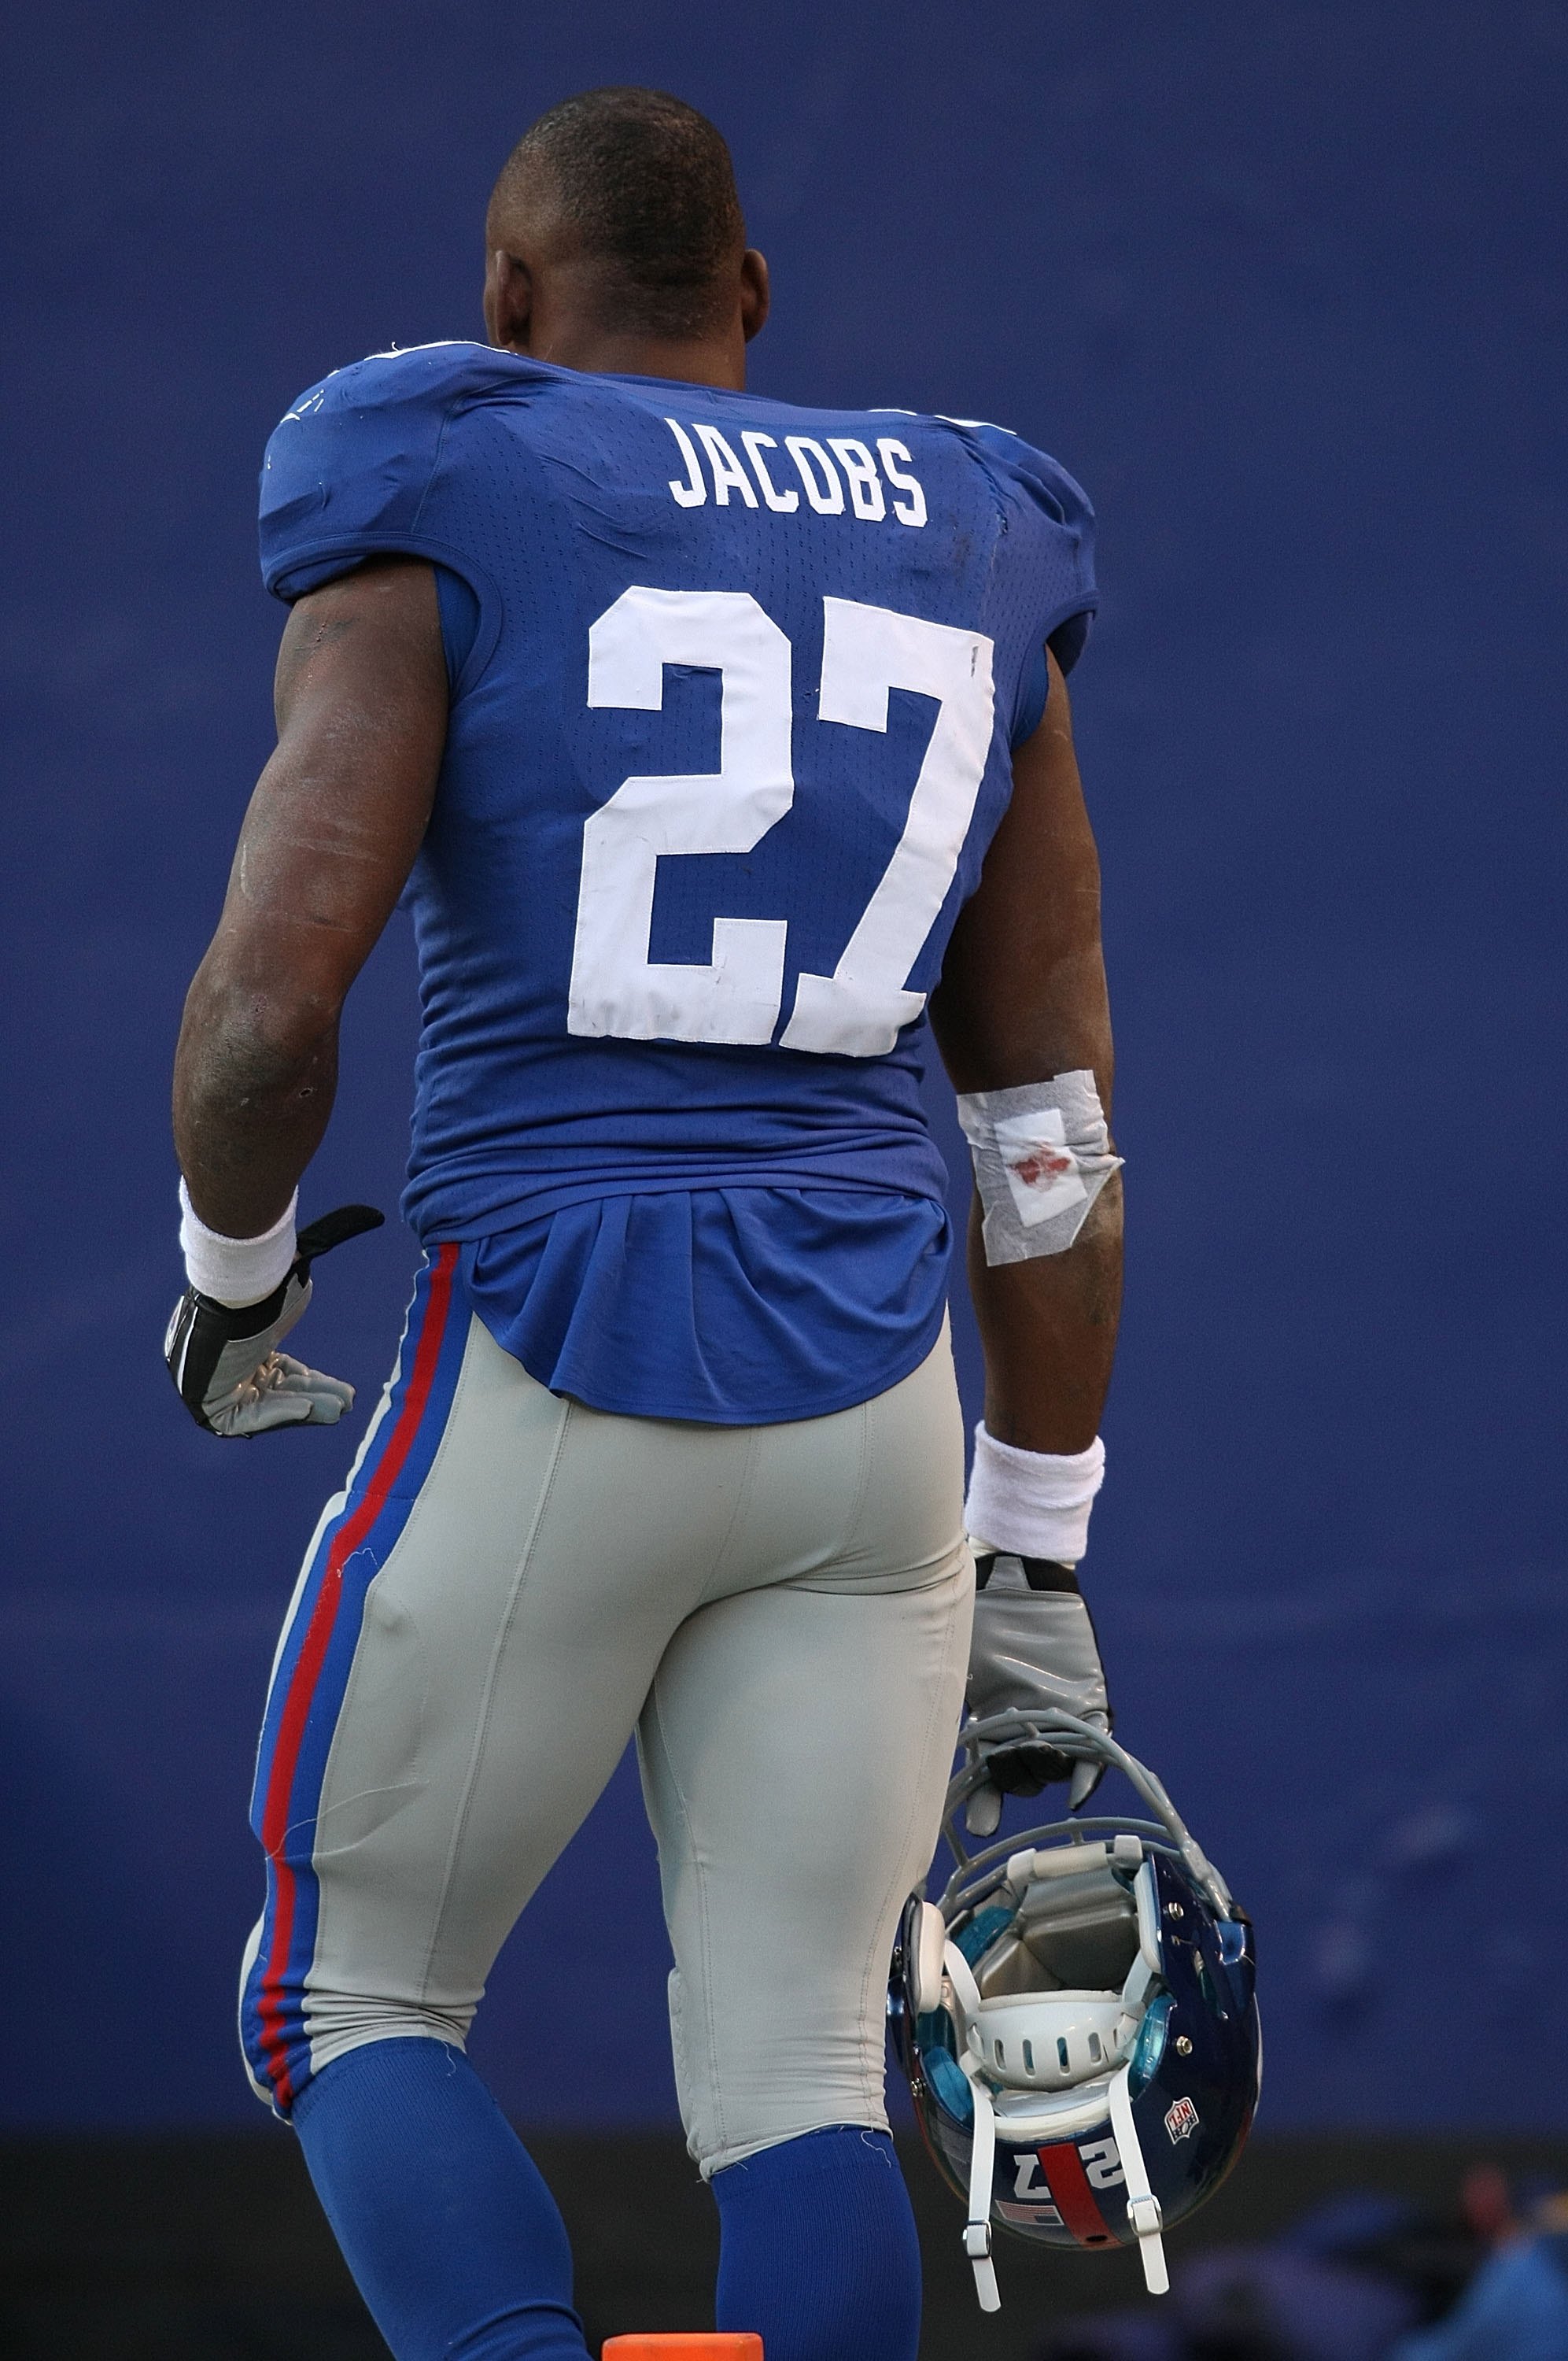 EAST RUTHERFORD, NJ - DECEMBER 27:  Brandon Jacobs #27 of the New York Giants against the Carolina Panthers at Giants Stadium on December 27, 2009 in East Rutherford, New Jersey.  (Photo by Nick Laham/Getty Images)